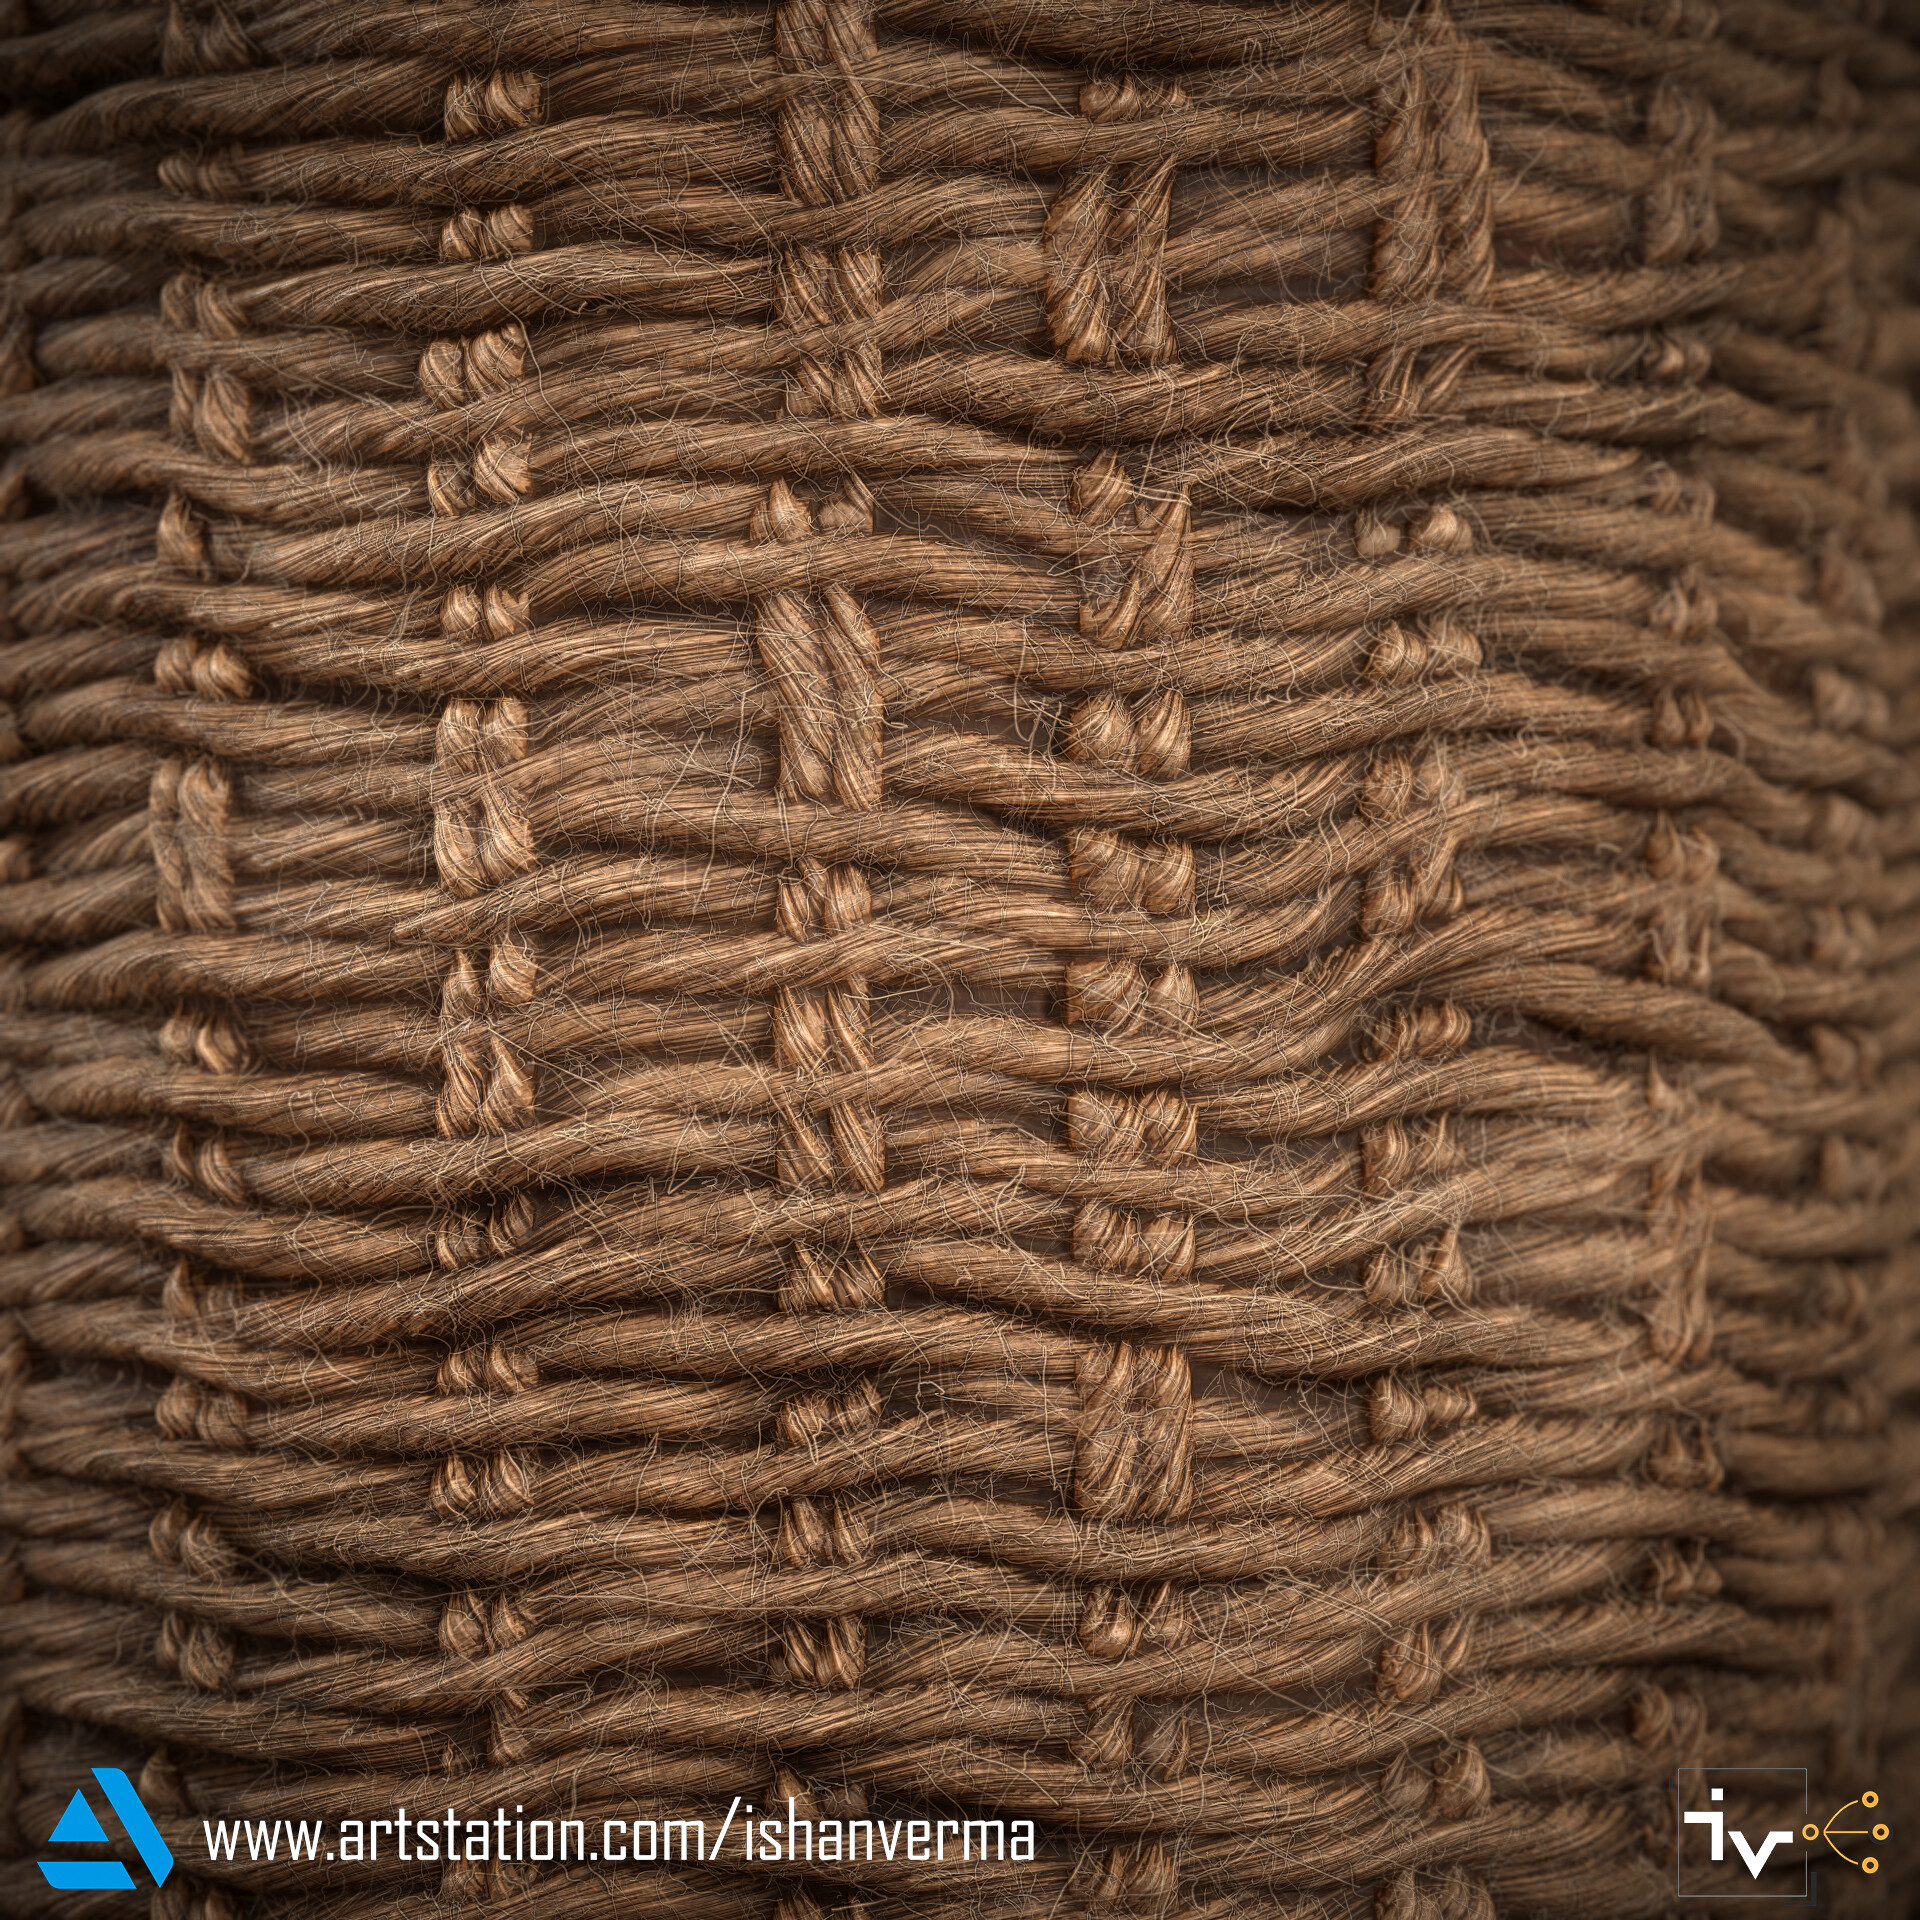 Woven Rope Substance by Ishan Verma